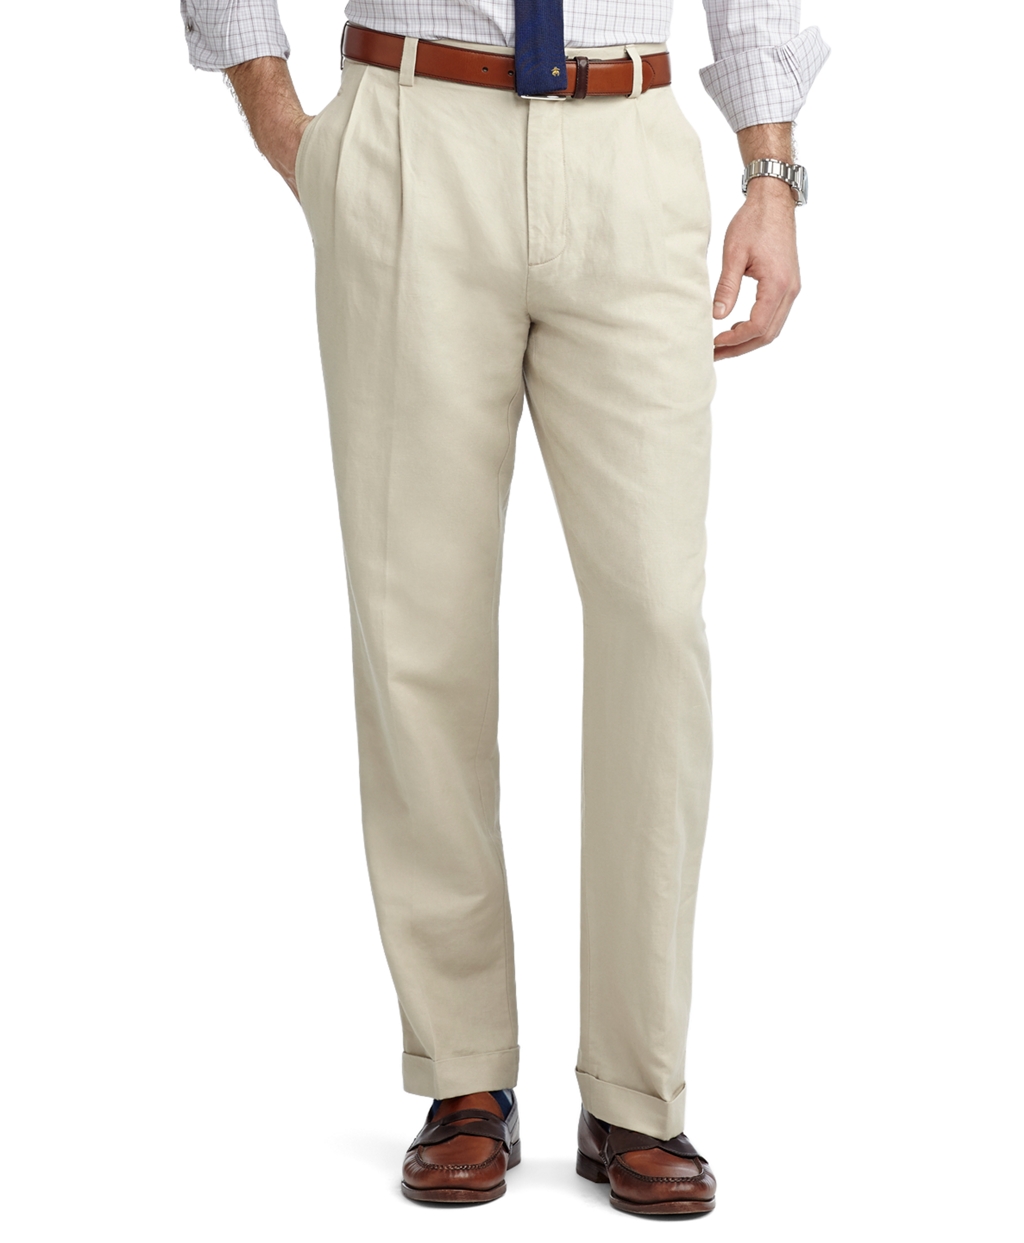 Lyst - Brooks brothers Elliot Fit Pleatfront Linen and Cotton Pants in ...